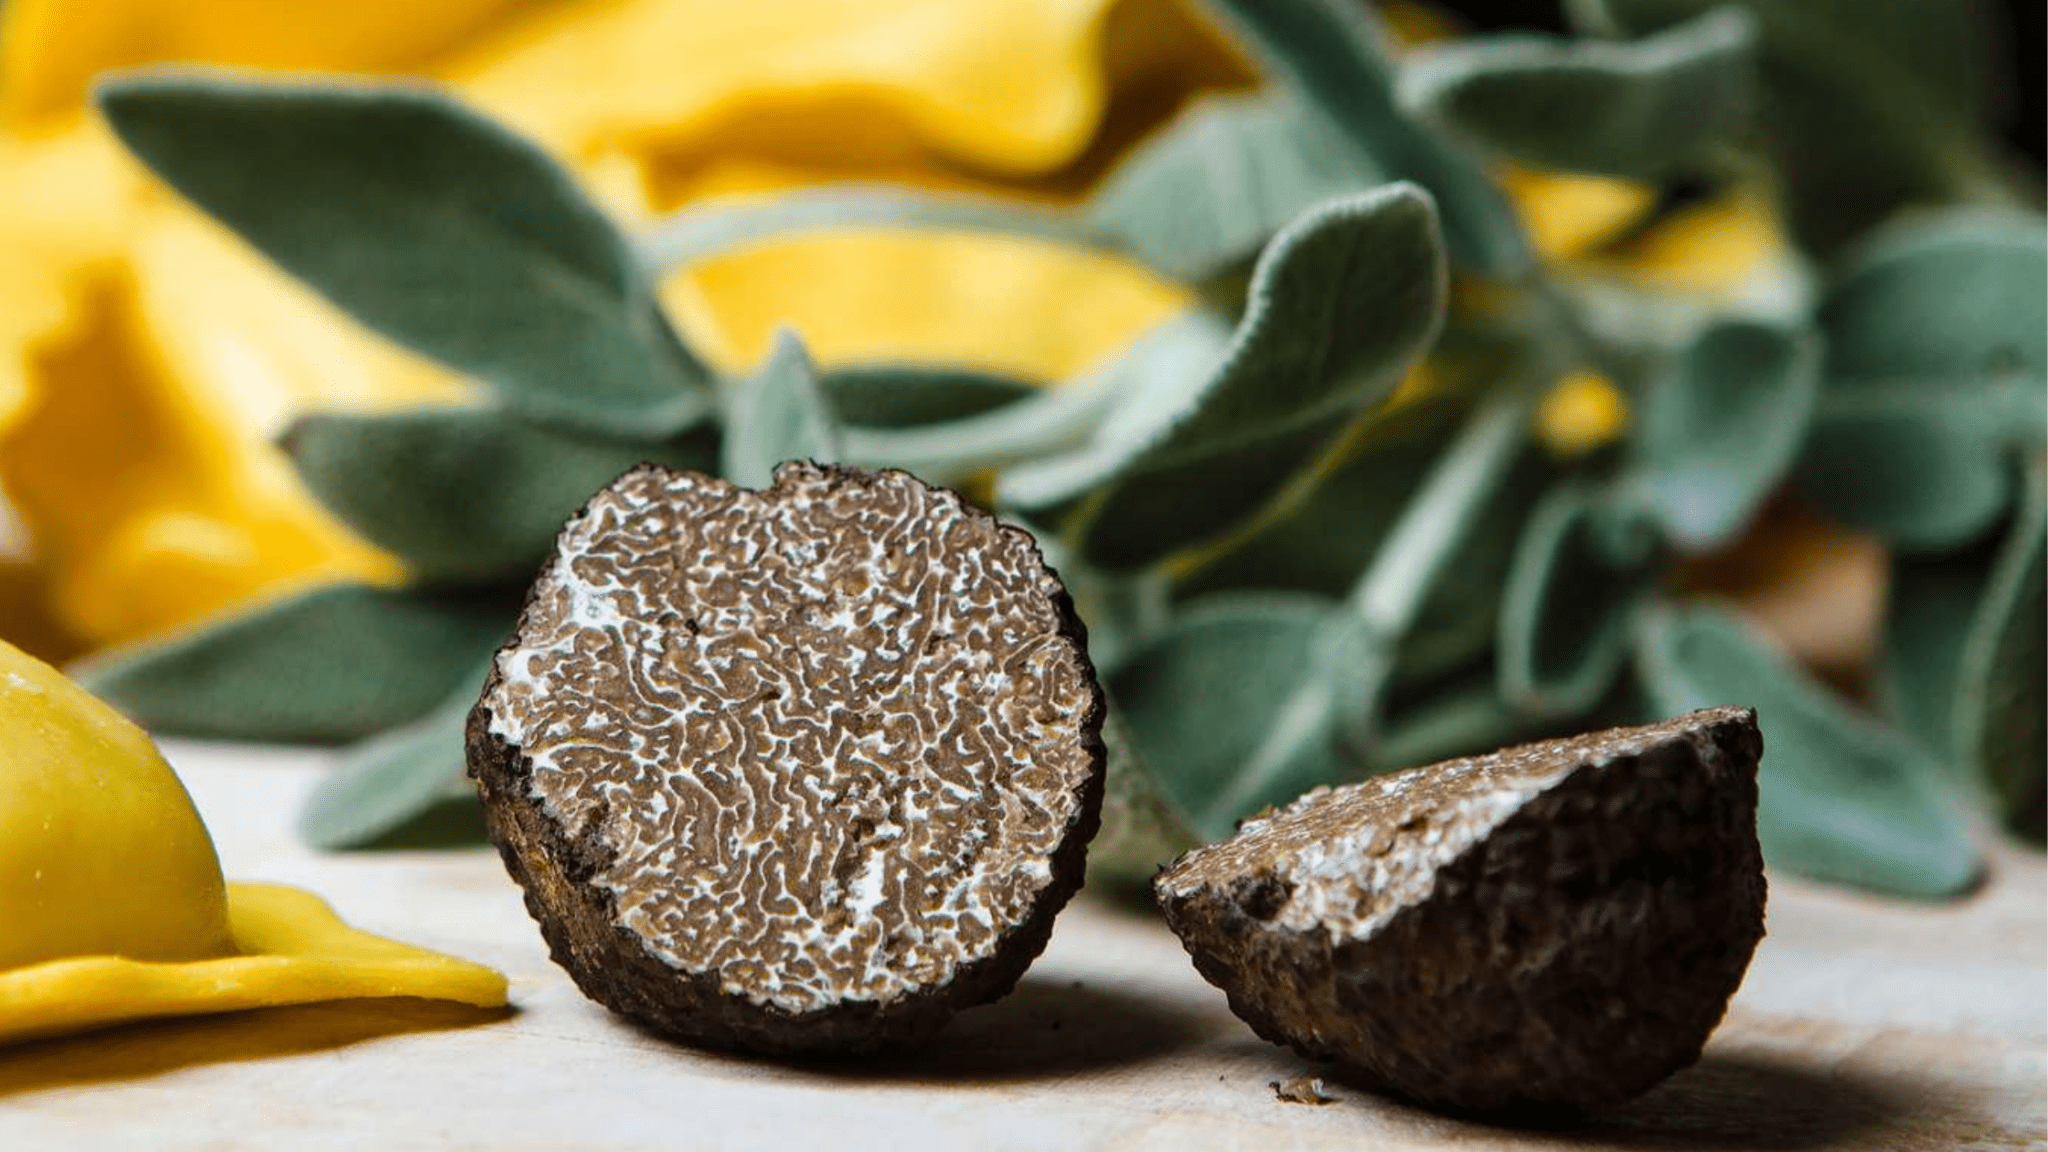 What Are Truffles Used For? - Aroma Truffle